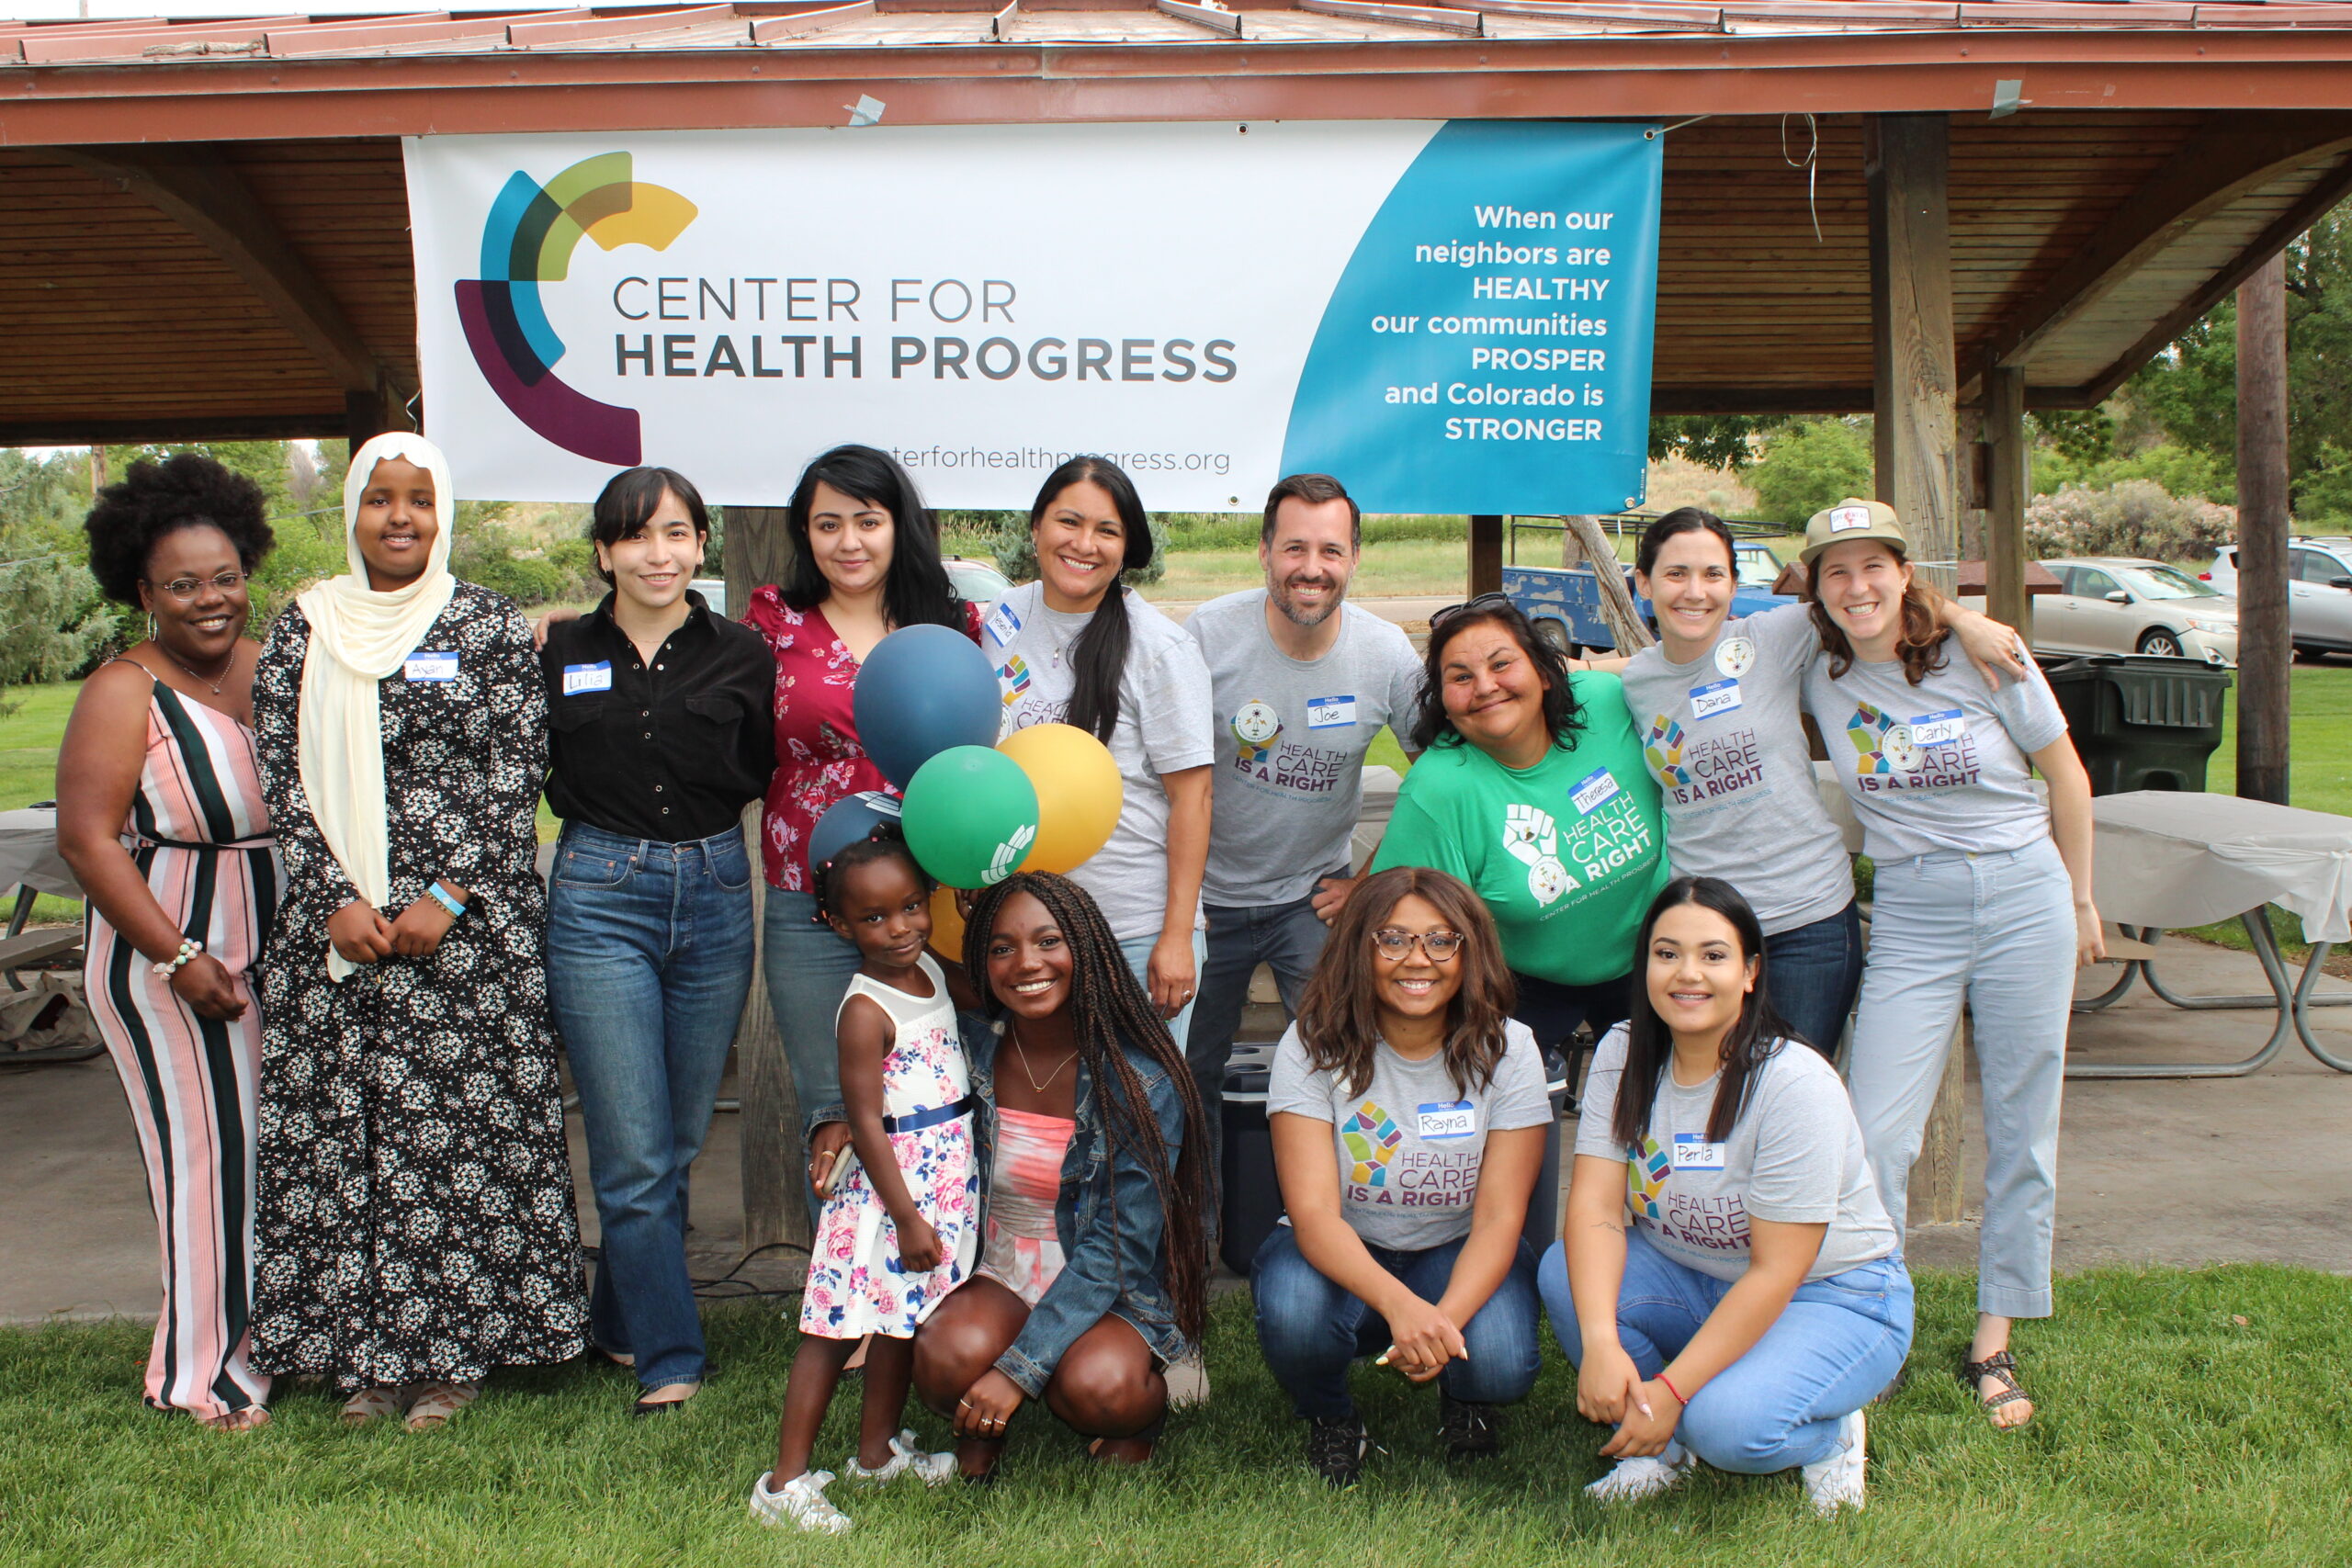 Staff and community gather at a park under Center for Health Progress banner